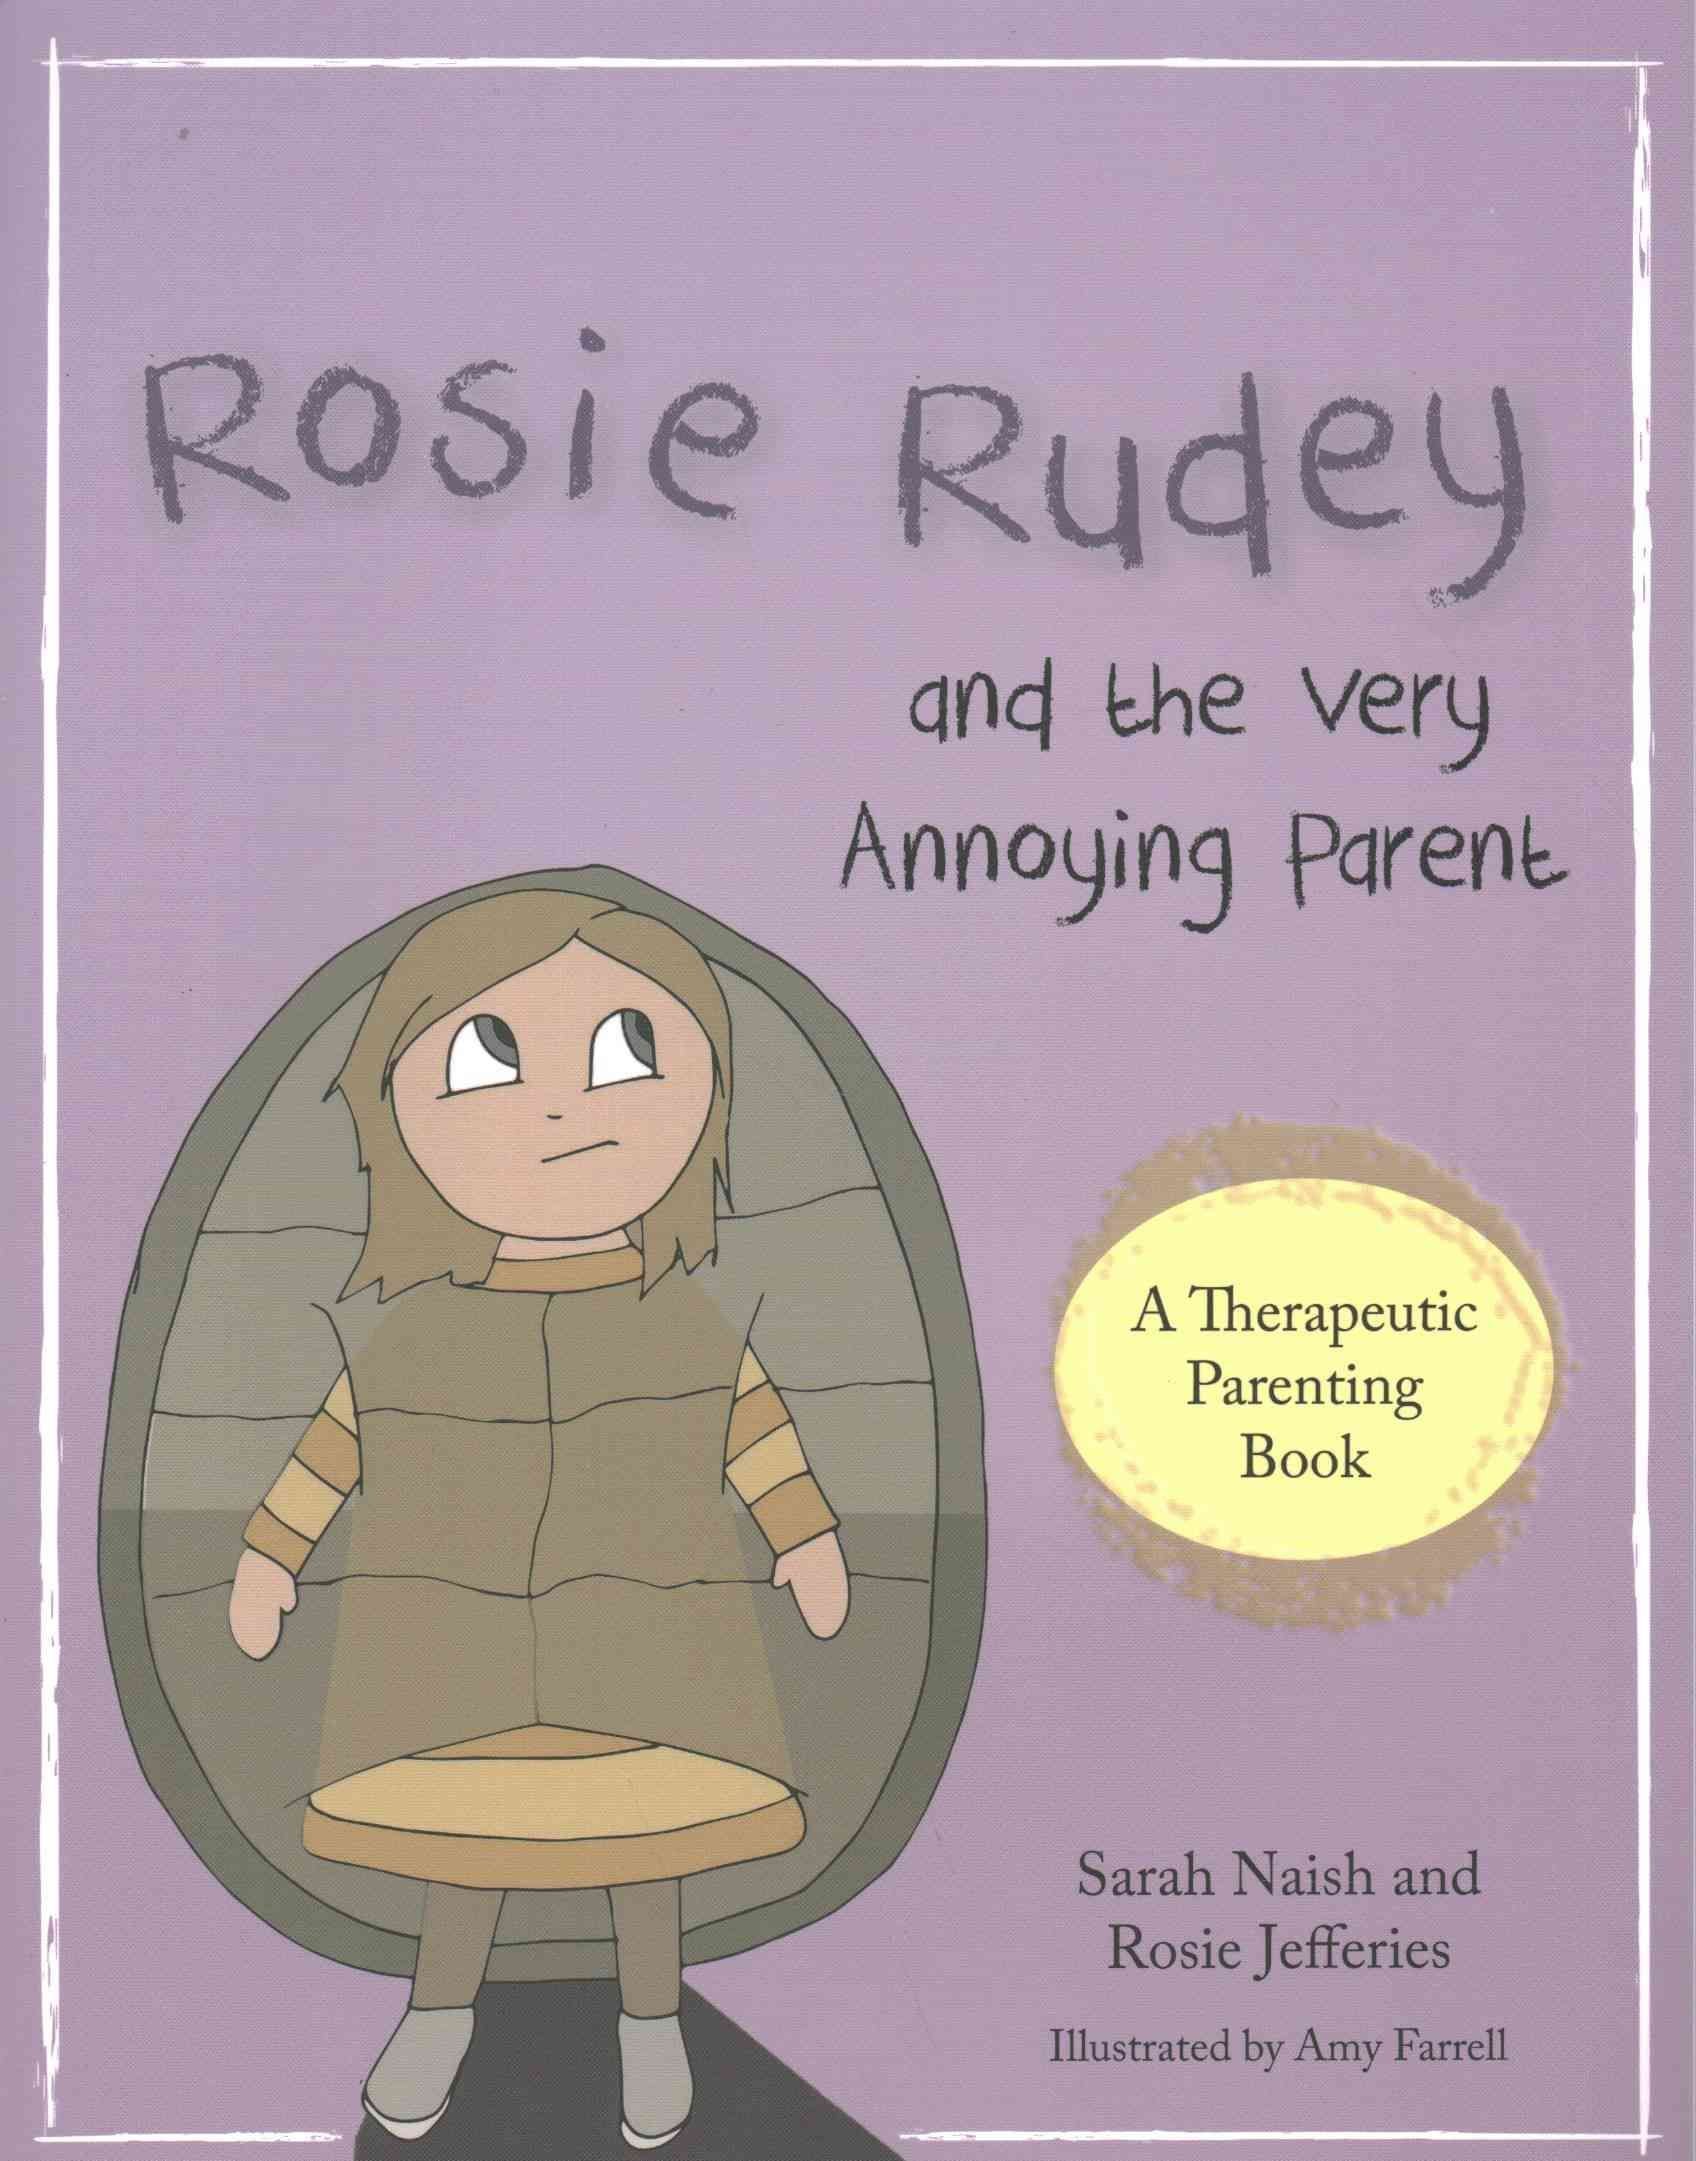 Rosie Rudey and the Very Annoying Parent